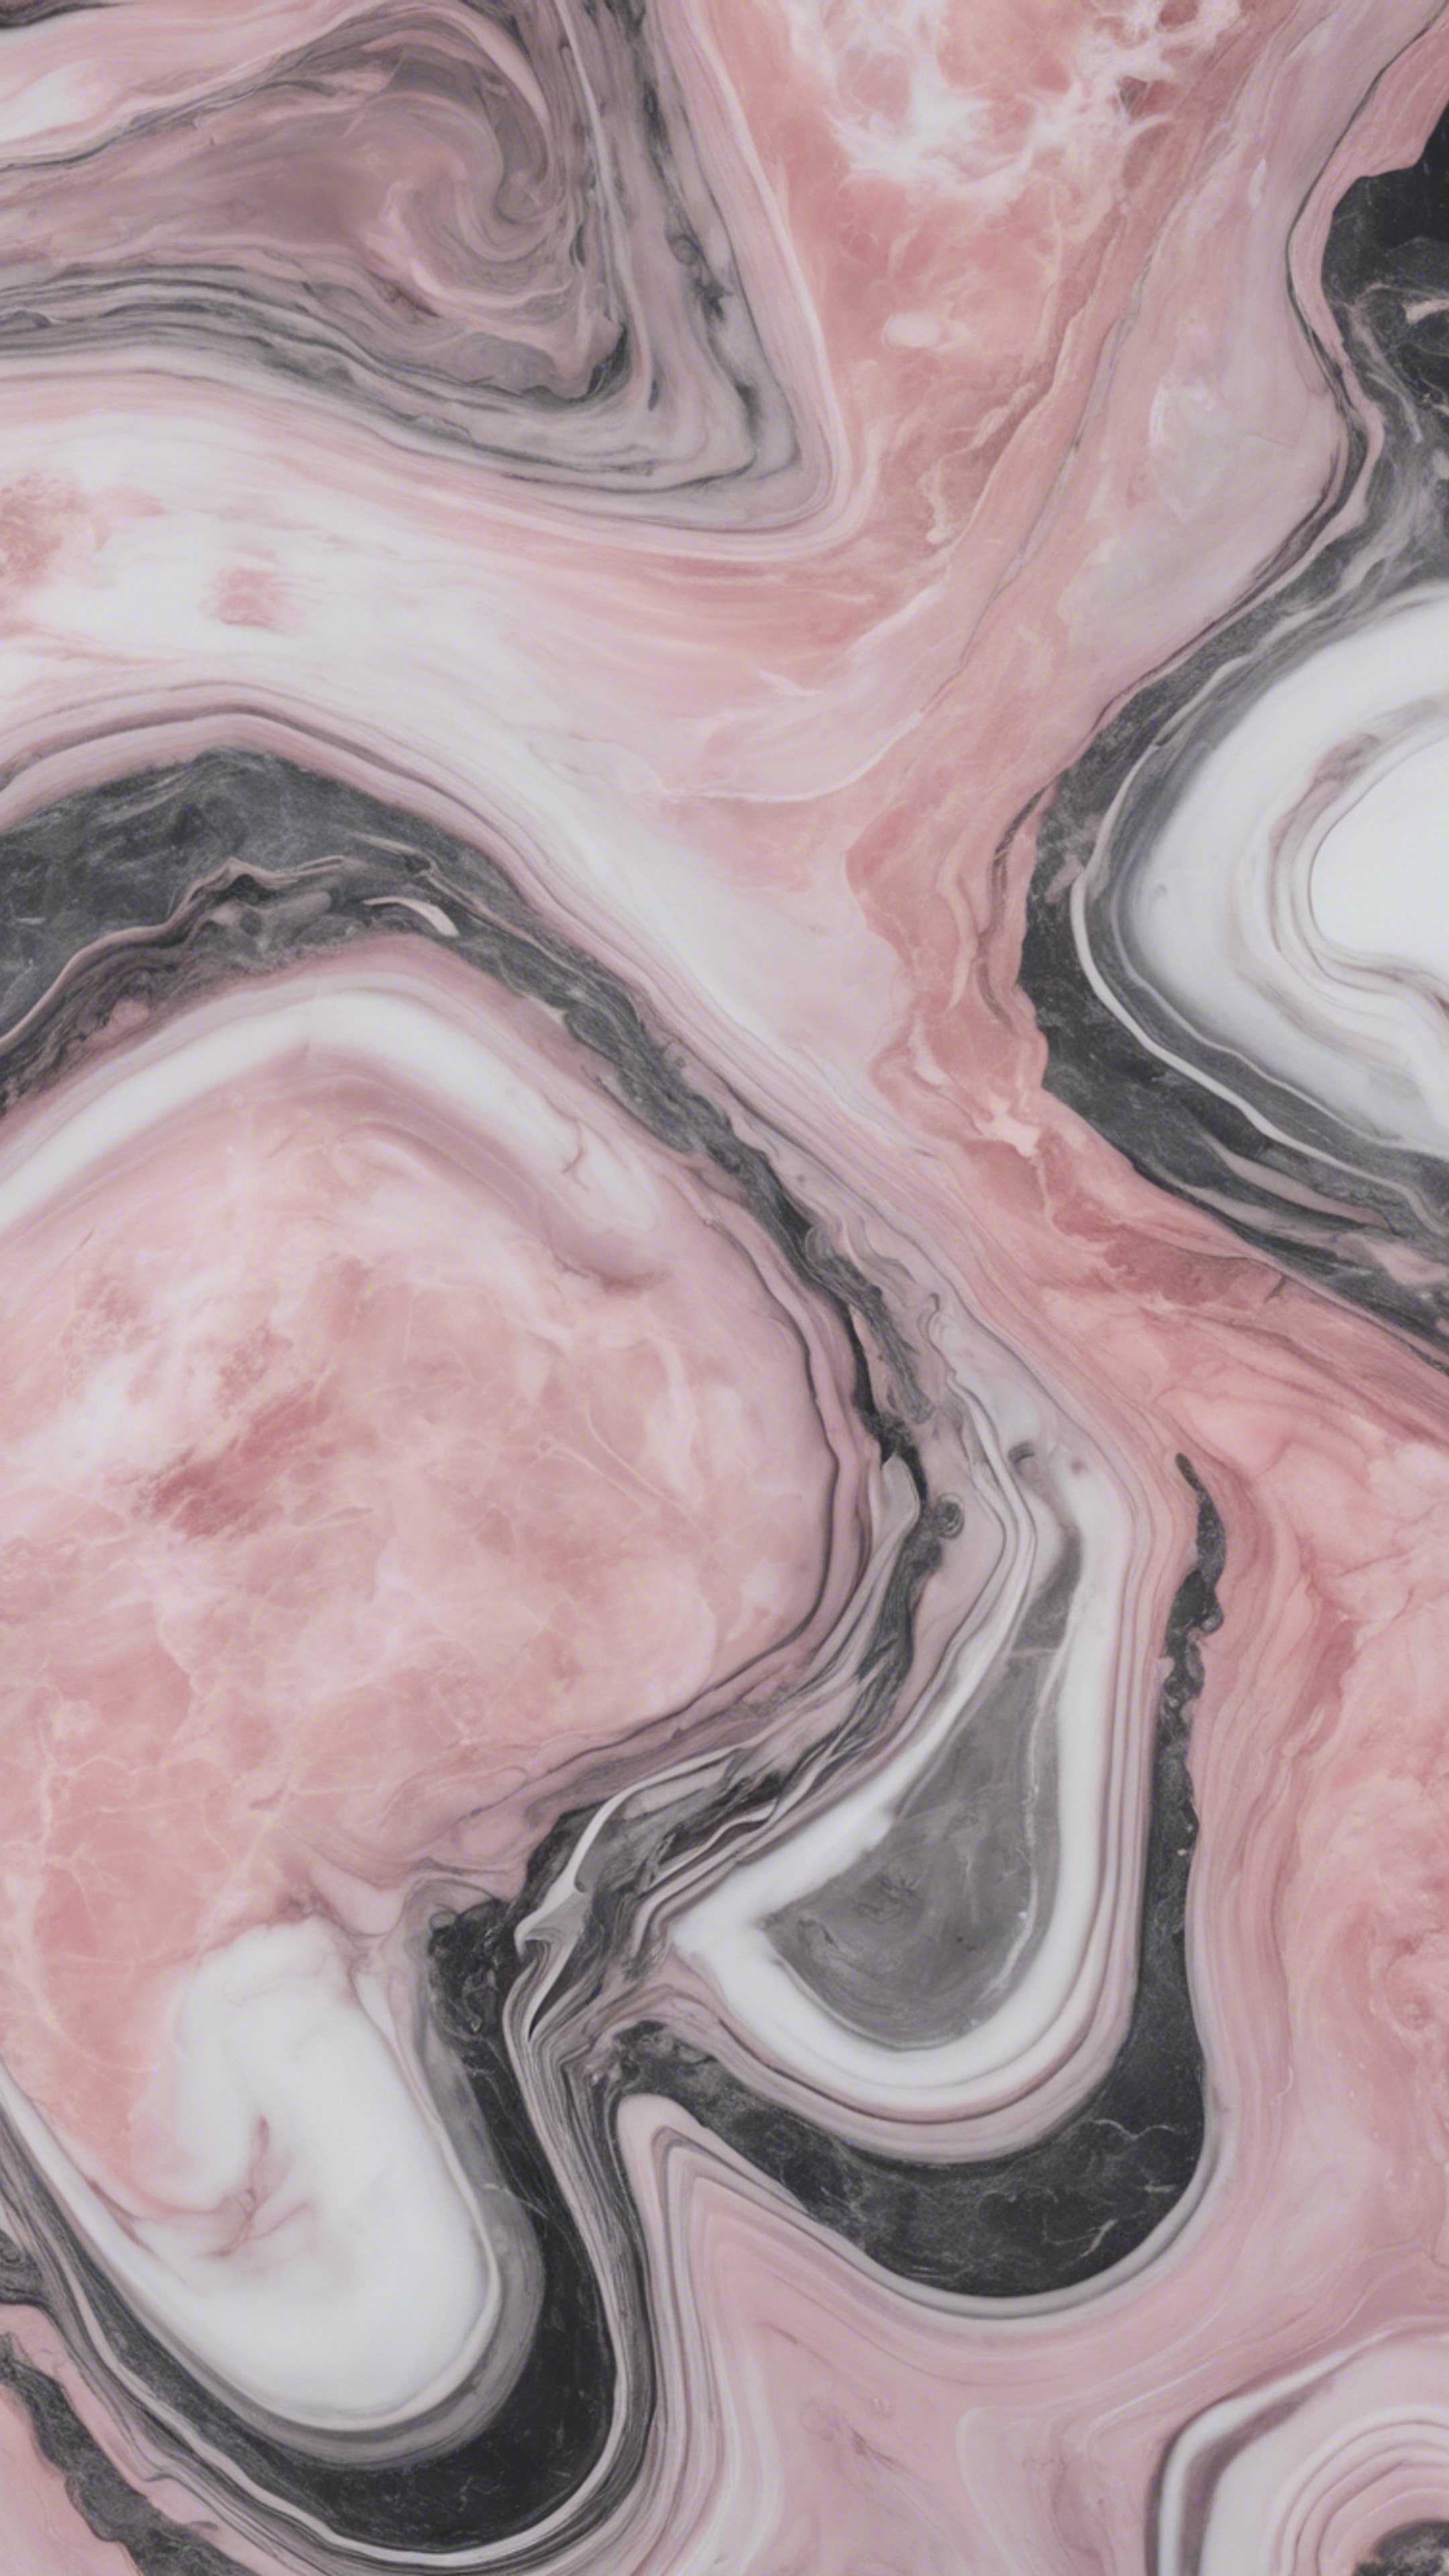 A swirling pattern of pink, white, and charcoal grey characteristic of polished pink marble. วอลล์เปเปอร์[fb90daec103040ffbaff]